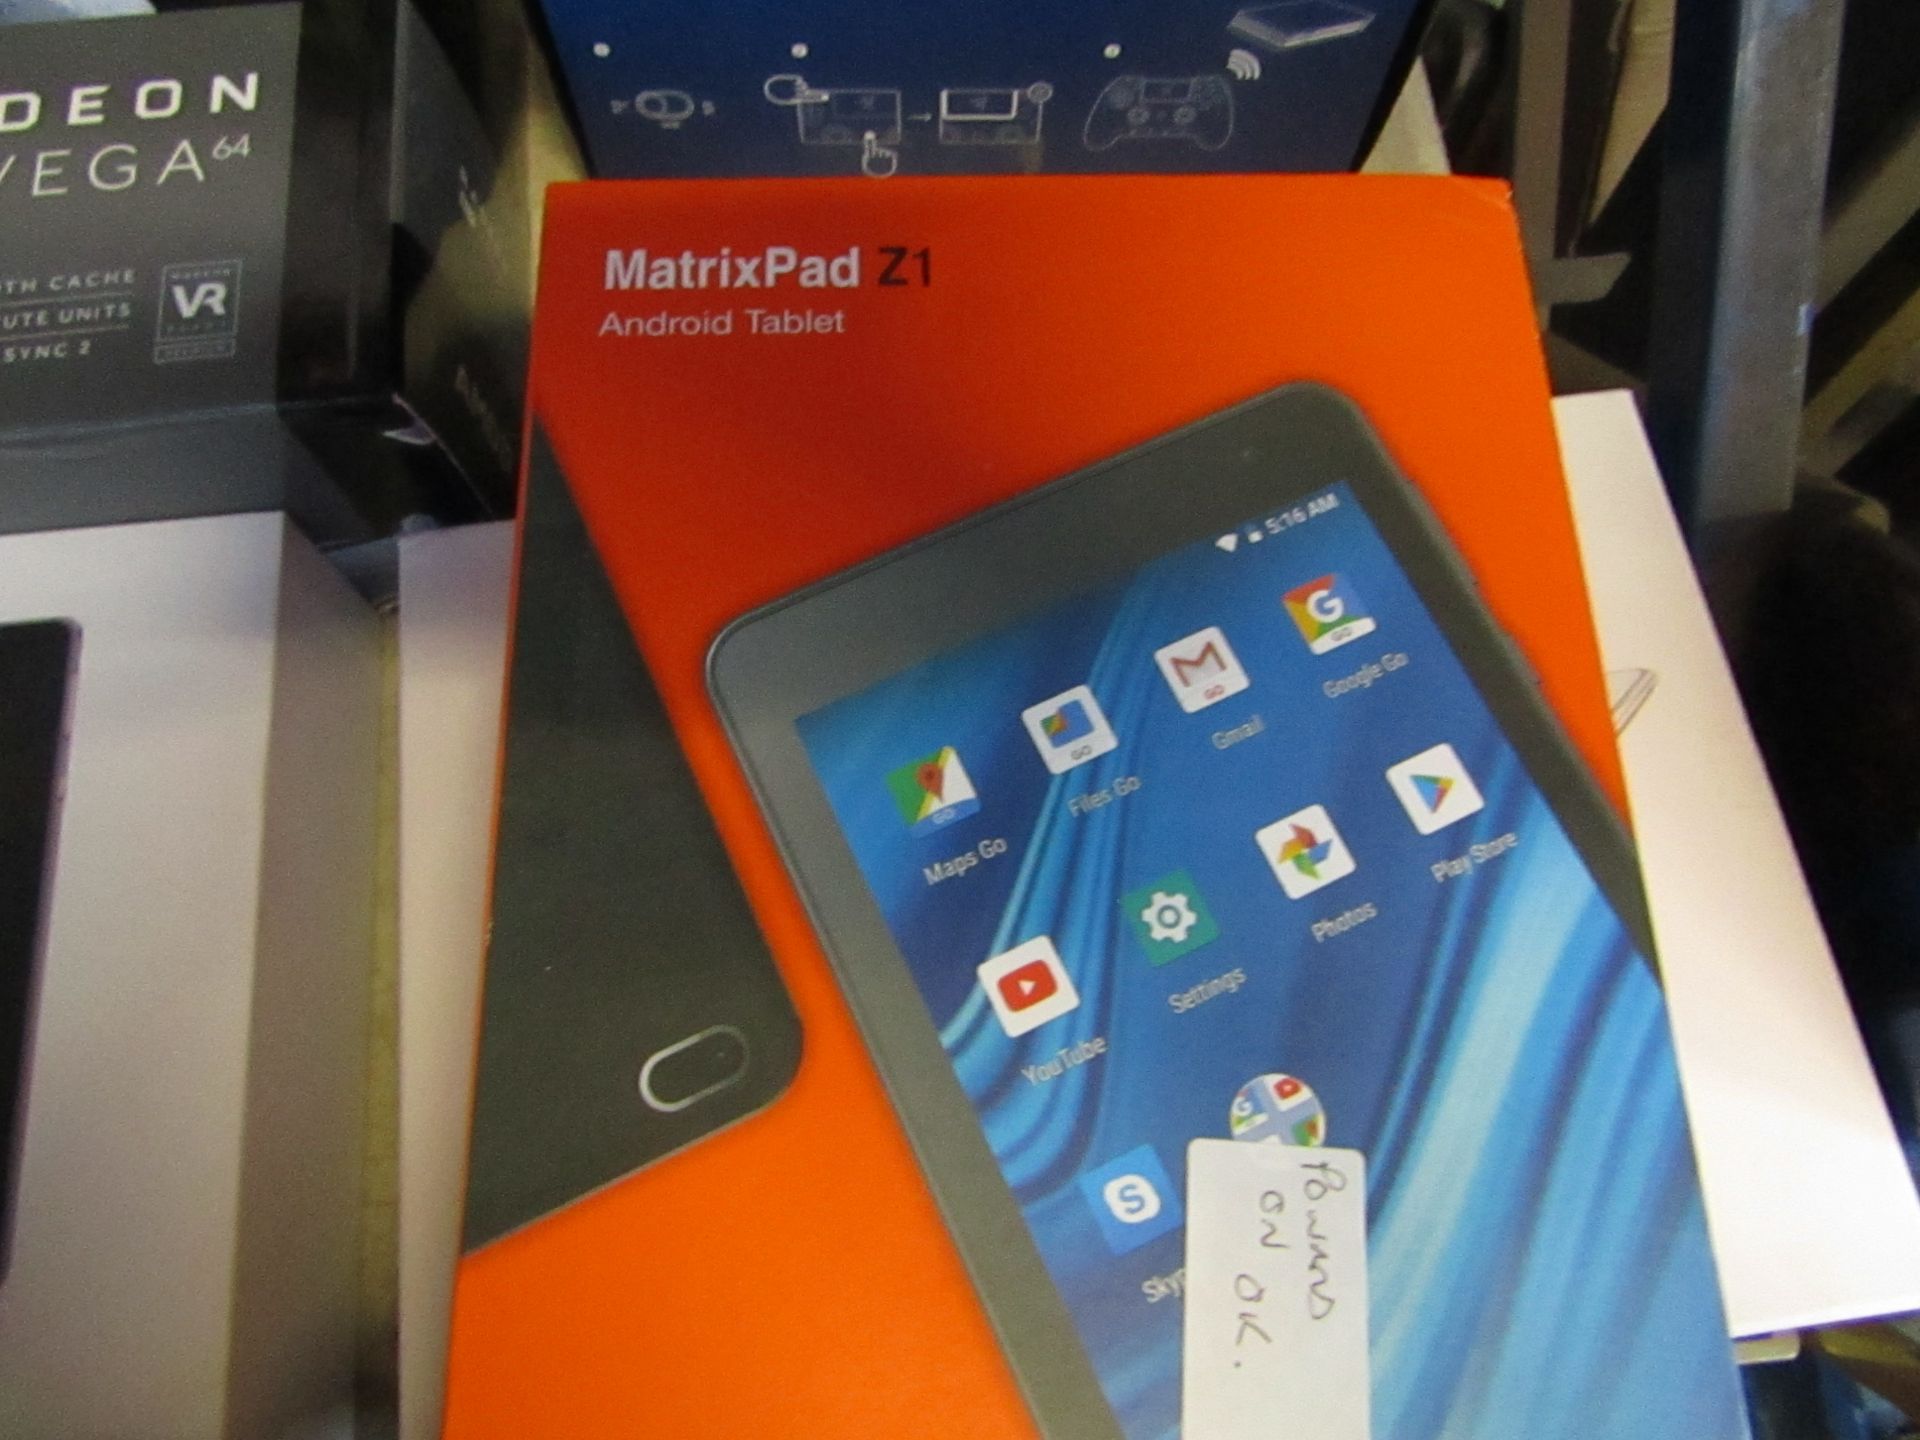 Matrix Pad Z1 Android tablet powers on and apears to work, in original boxed